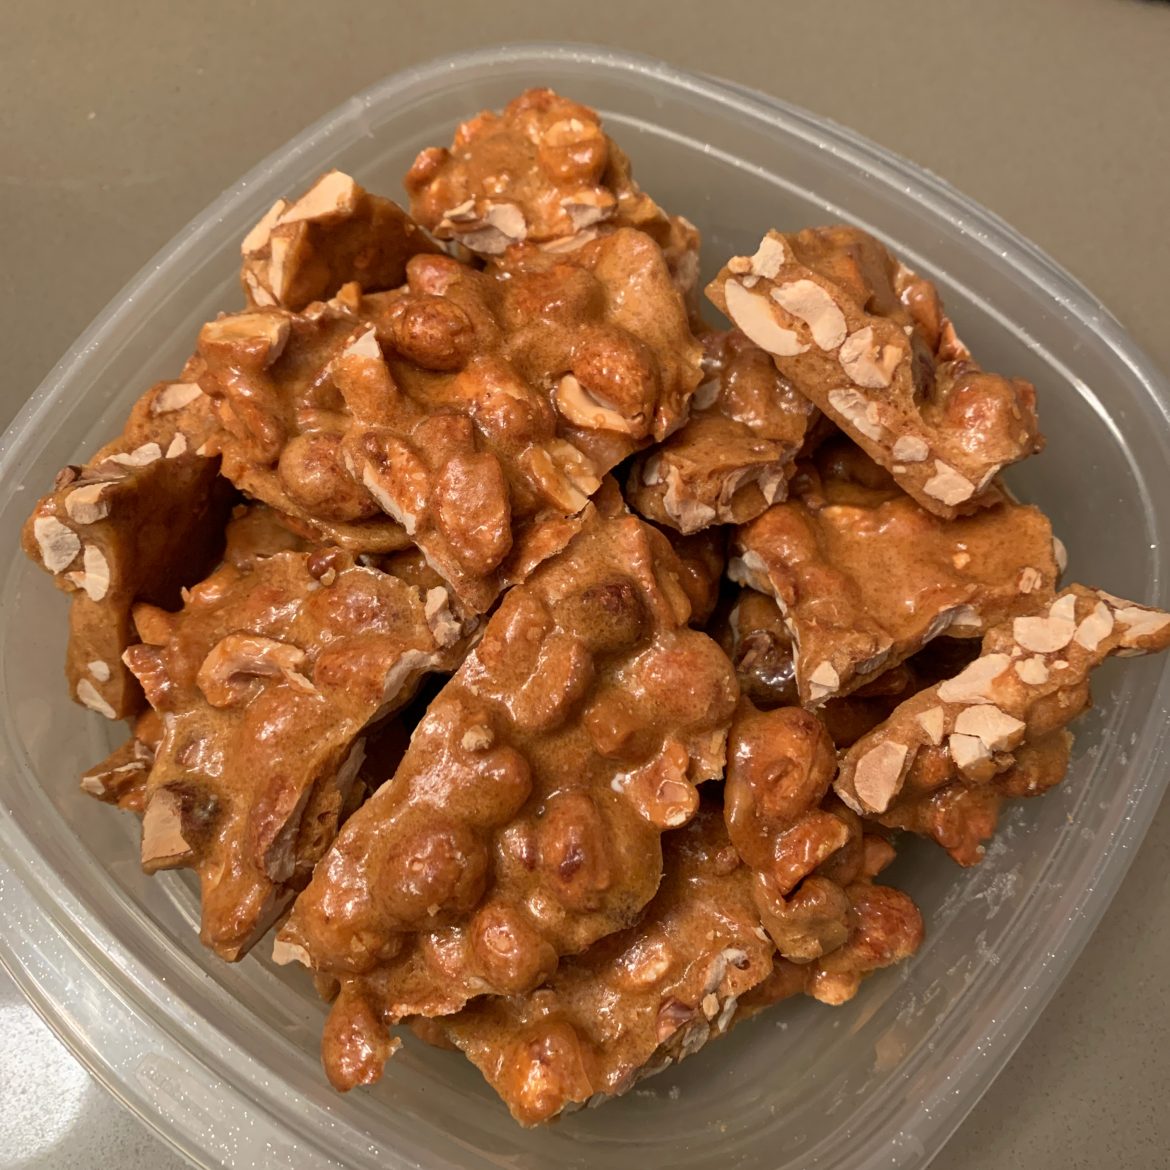 MICROWAVE OVEN PEANUT BRITTLE